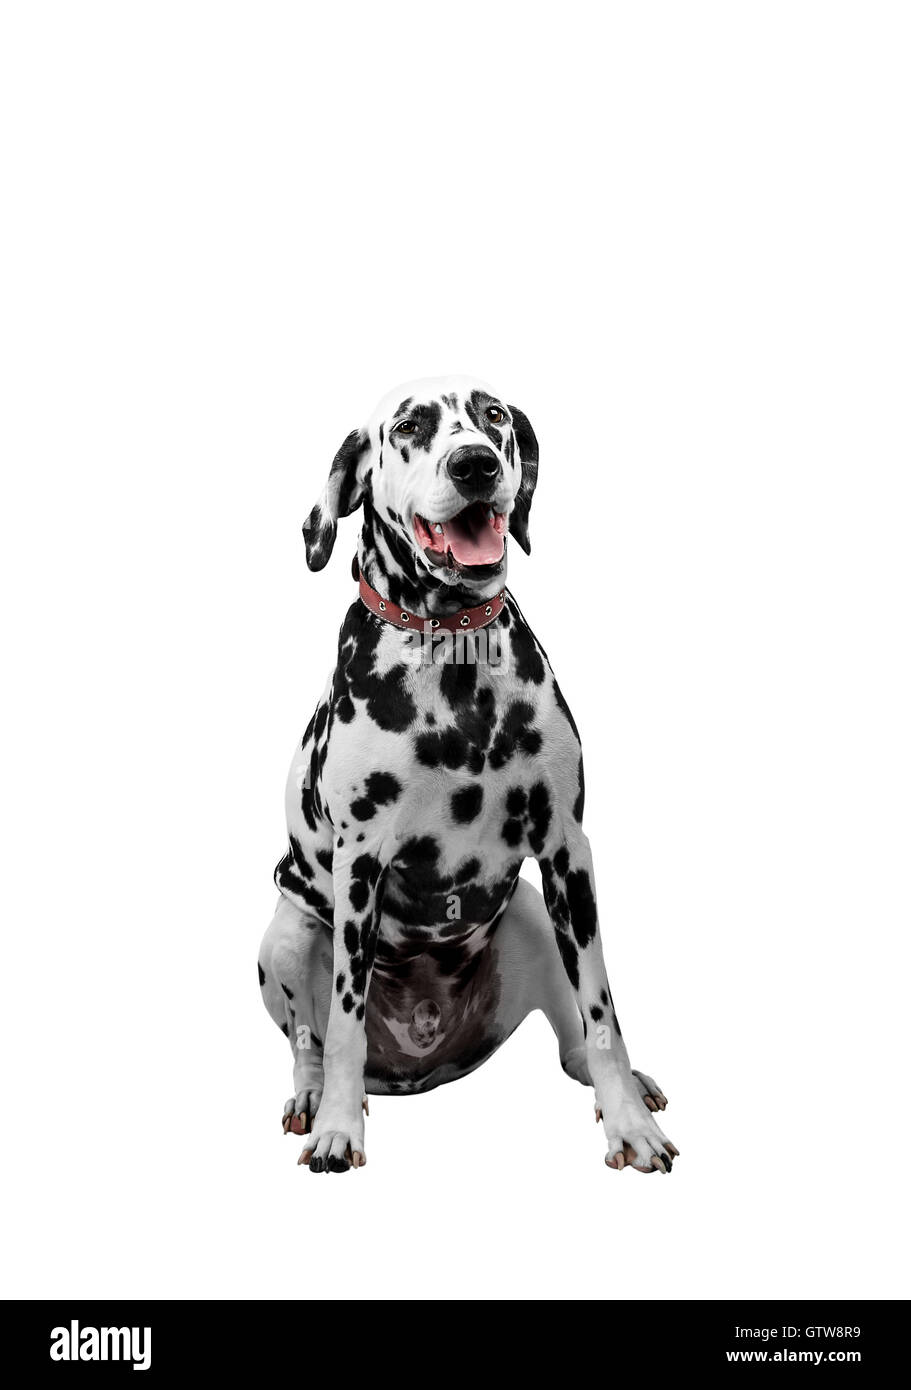 Dalmatian dog sitting and looking forward with his tongue out Stock Photo